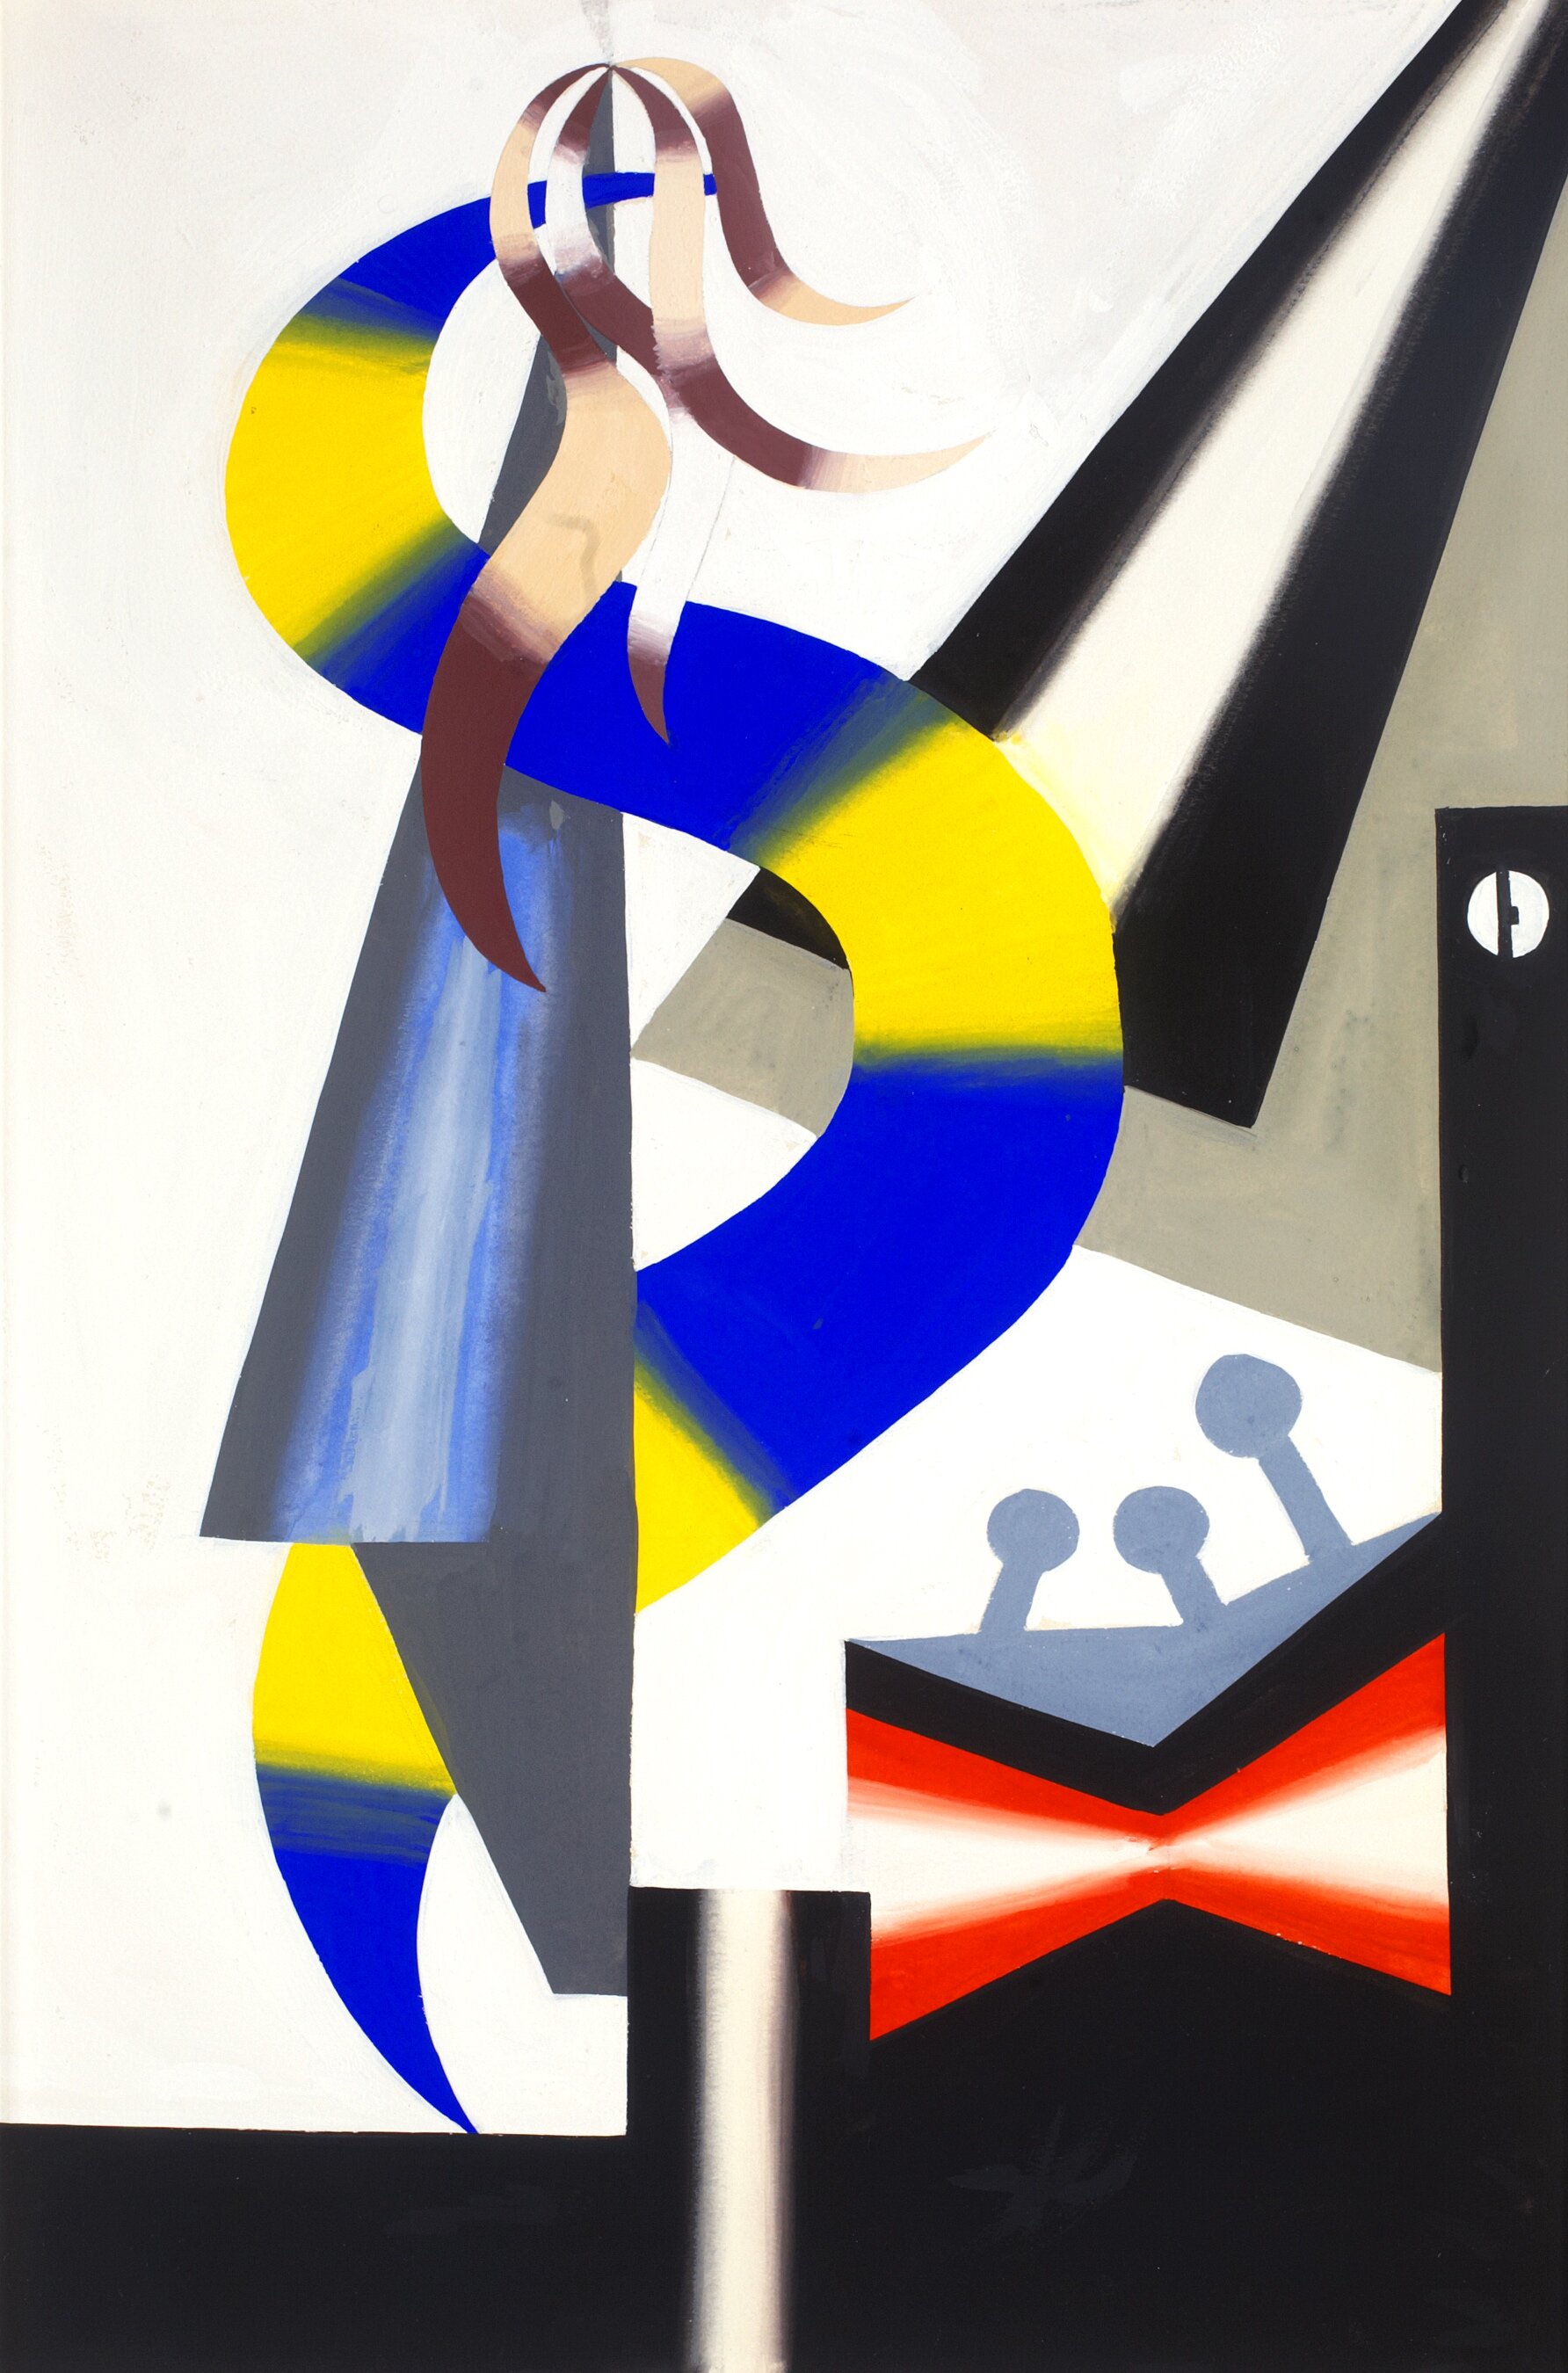 Abstract gouache with conical and ribbon-like shapes in black, white, blue, red, and brown